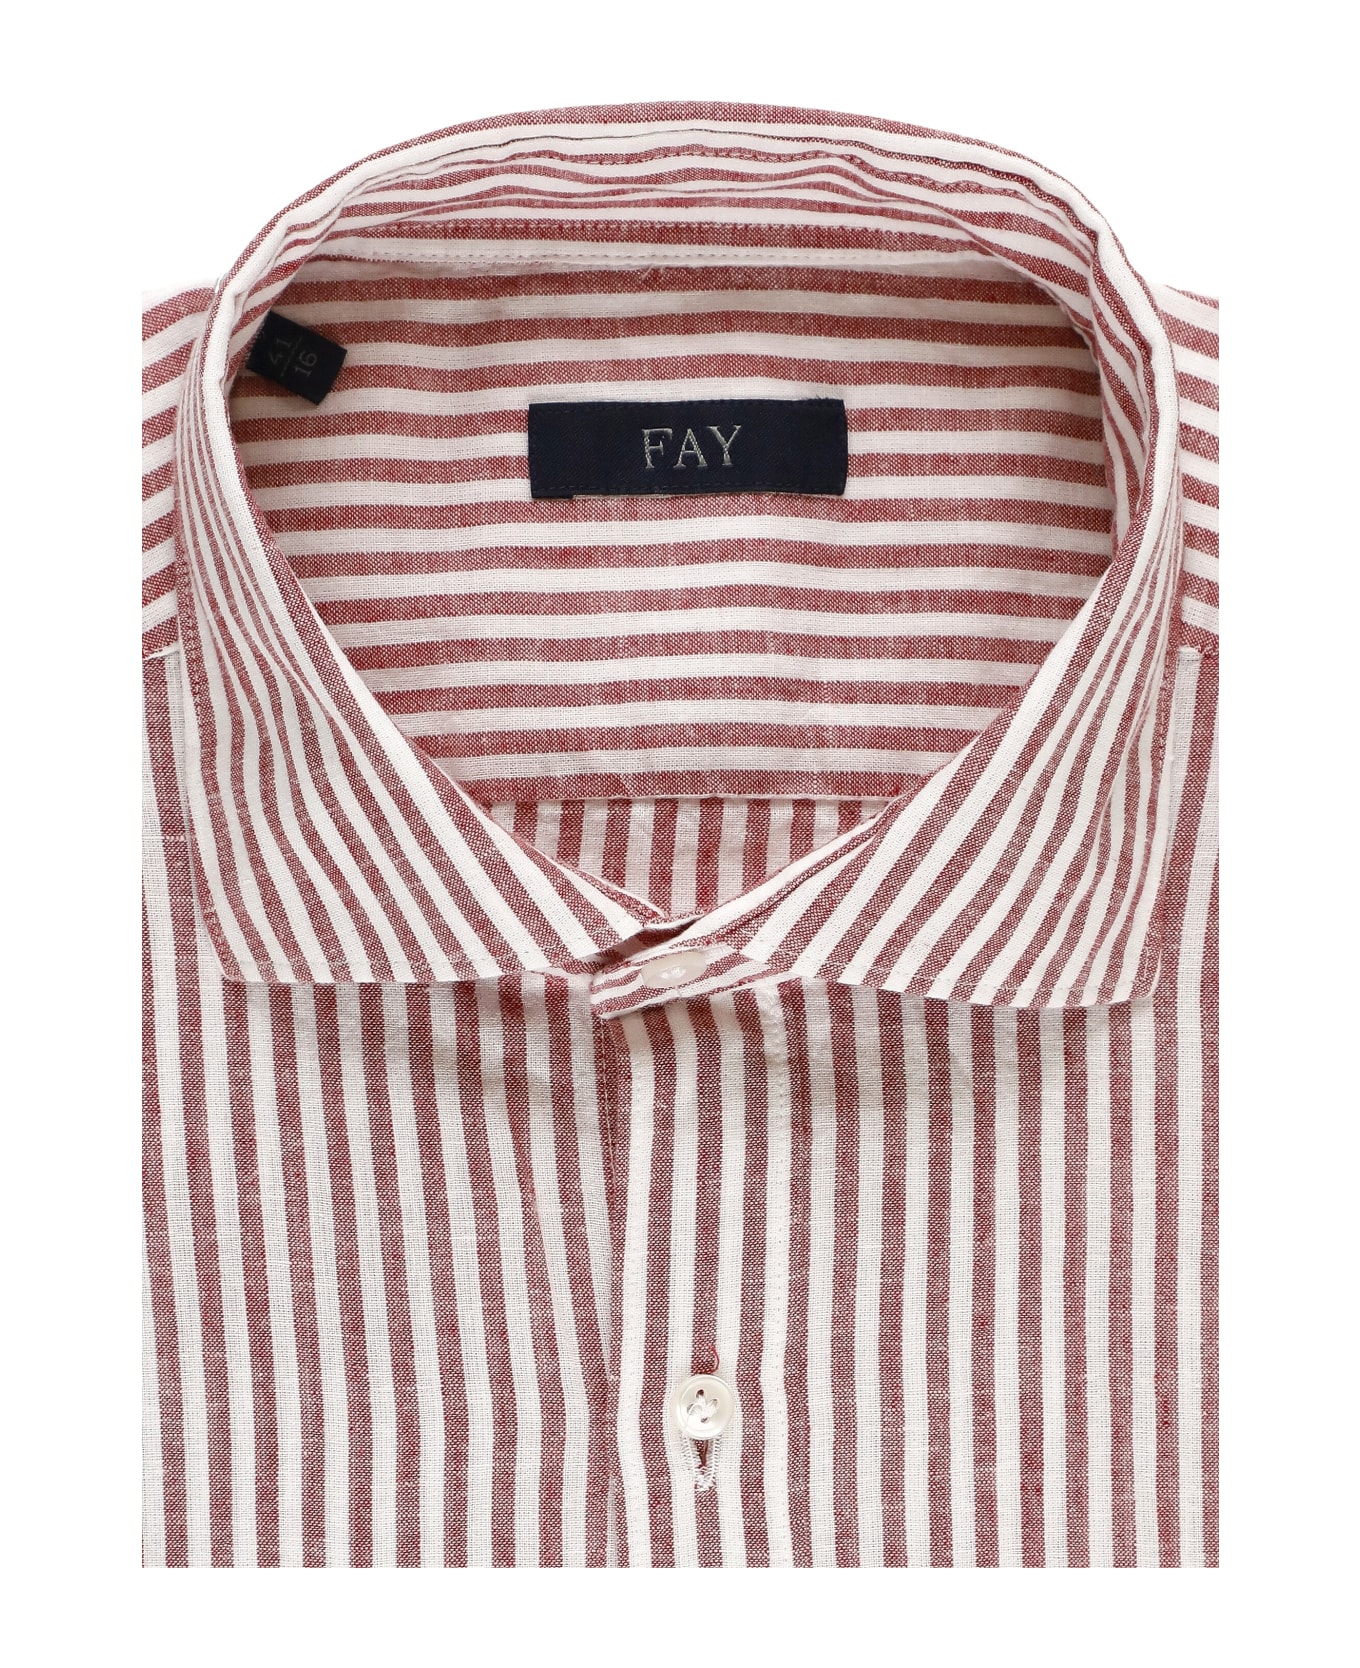 Fay Striped Shirt - Red シャツ